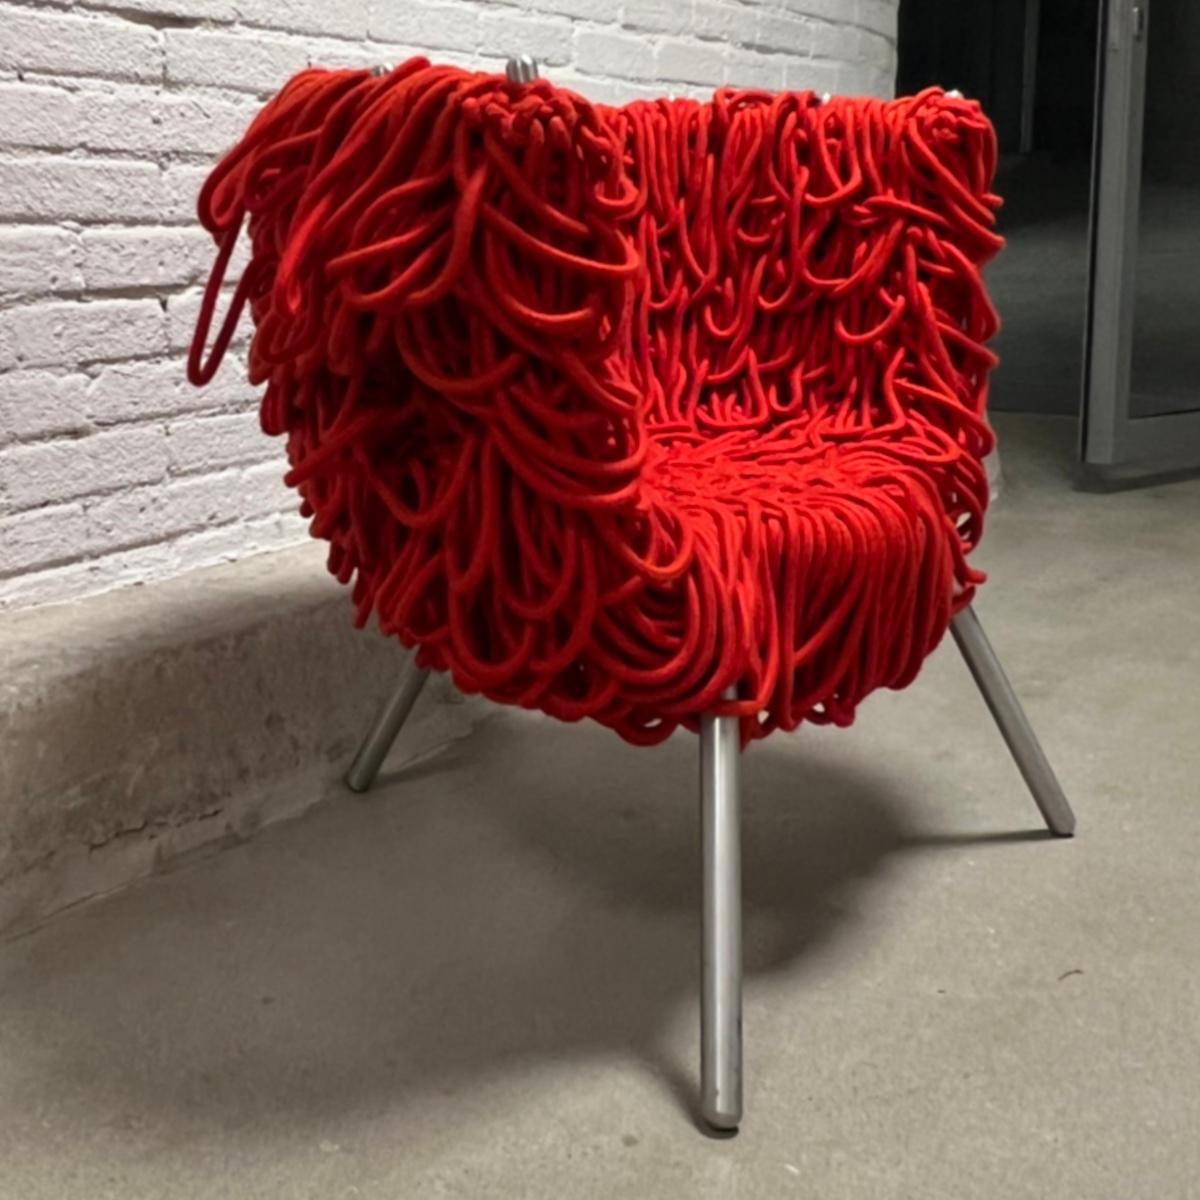 Made of Iron, aluminum and cord.
The renowned furniture designers, the Campana brothers, are known for their use of unconventional materials in their design practice. These materials often remain the vibrant street culture and traditions of 